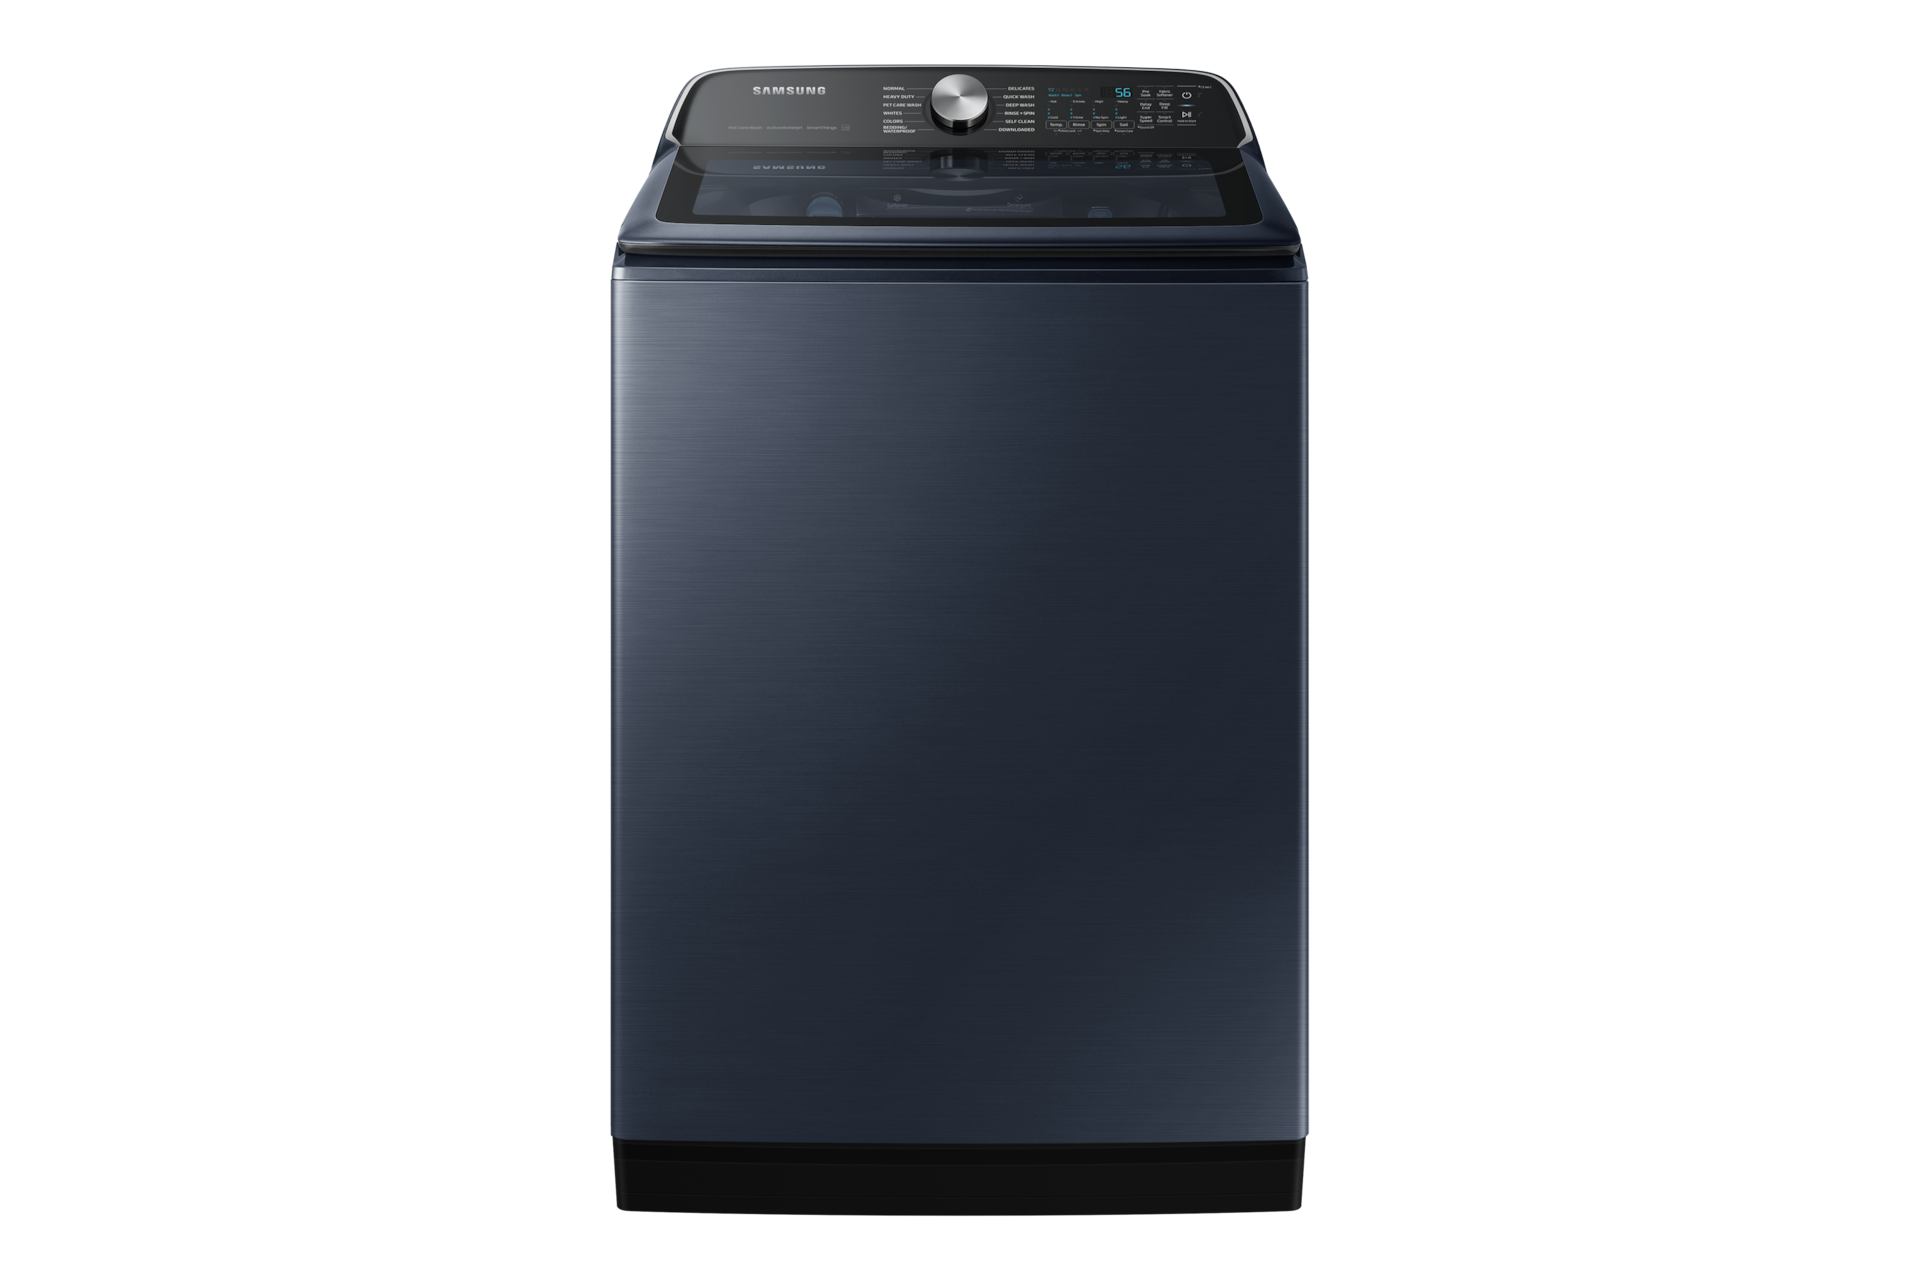 Image of Samsung 6.2 cu. ft. 7150 Series Top Load Washer with Pet Care Solution